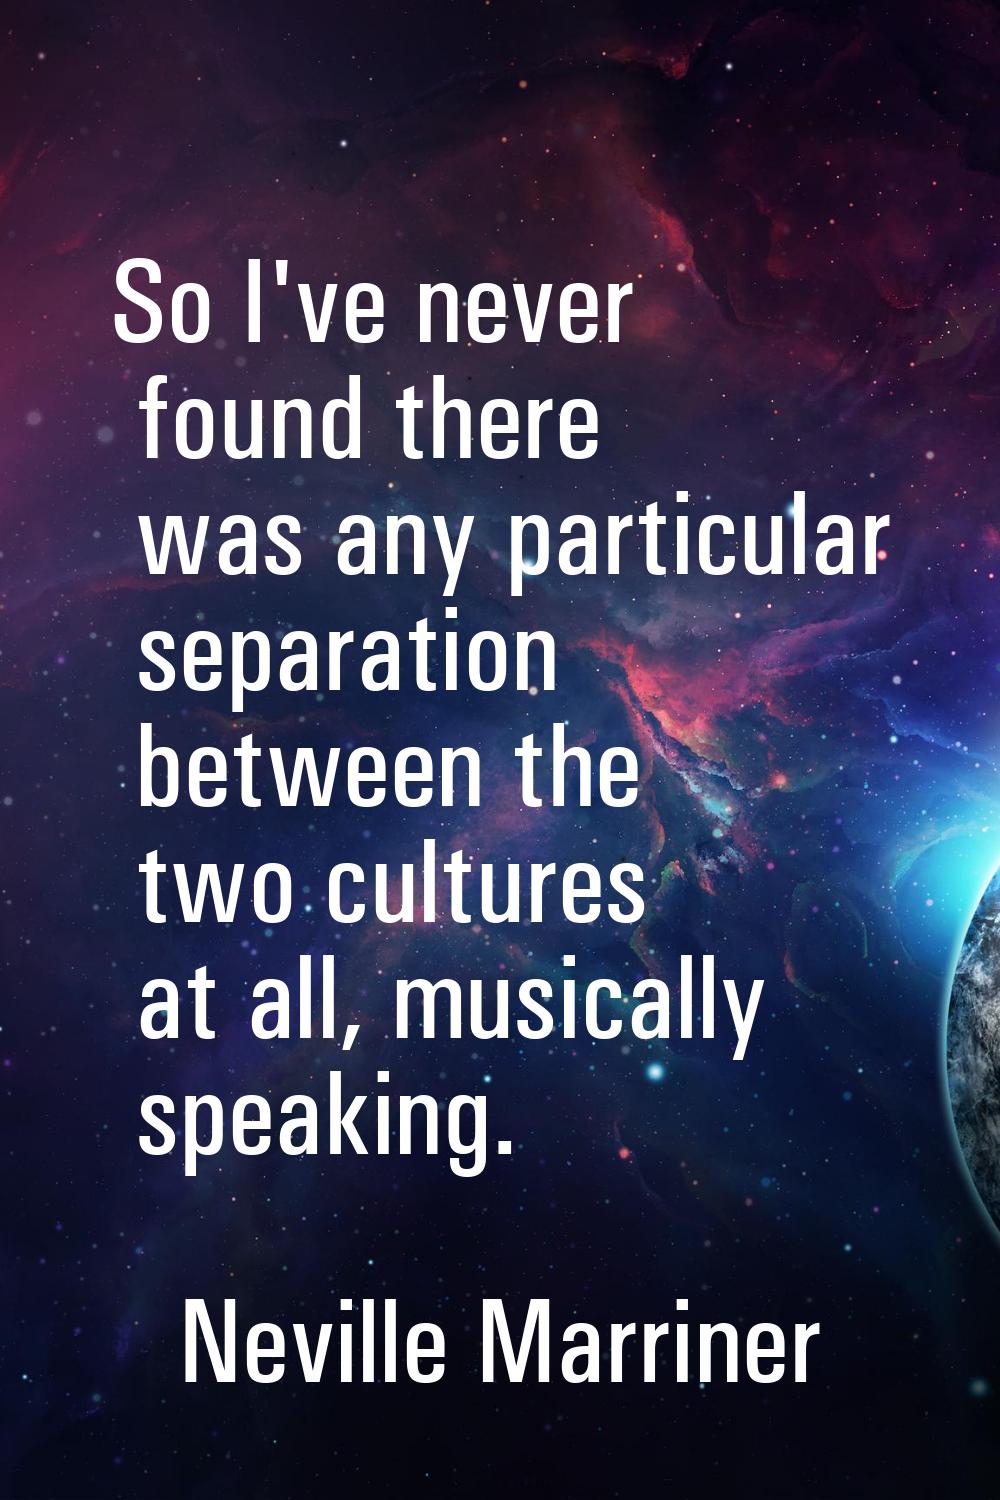 So I've never found there was any particular separation between the two cultures at all, musically 